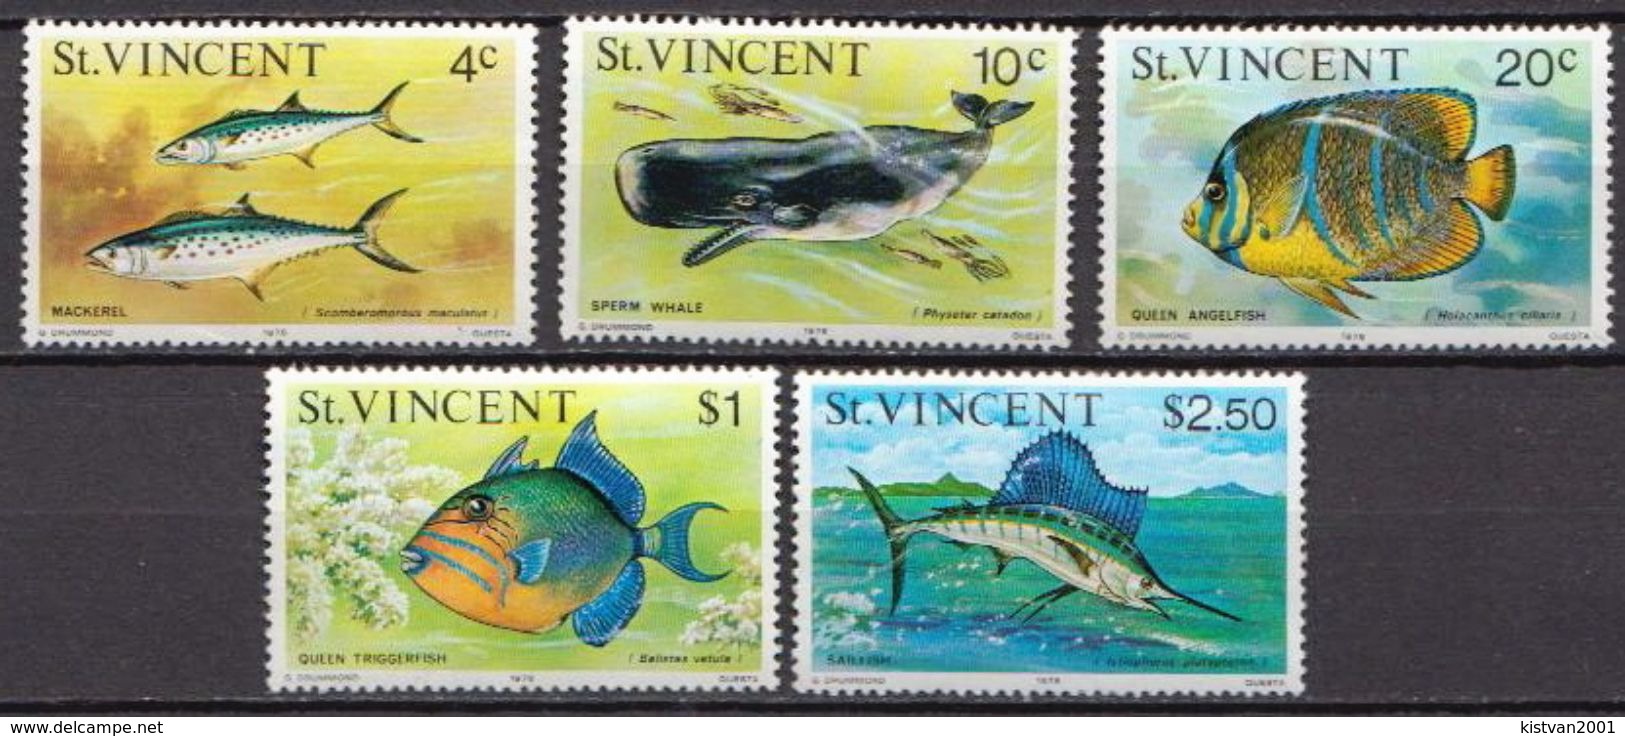 St Vincent MNH Set With Year 1976 - Fishes